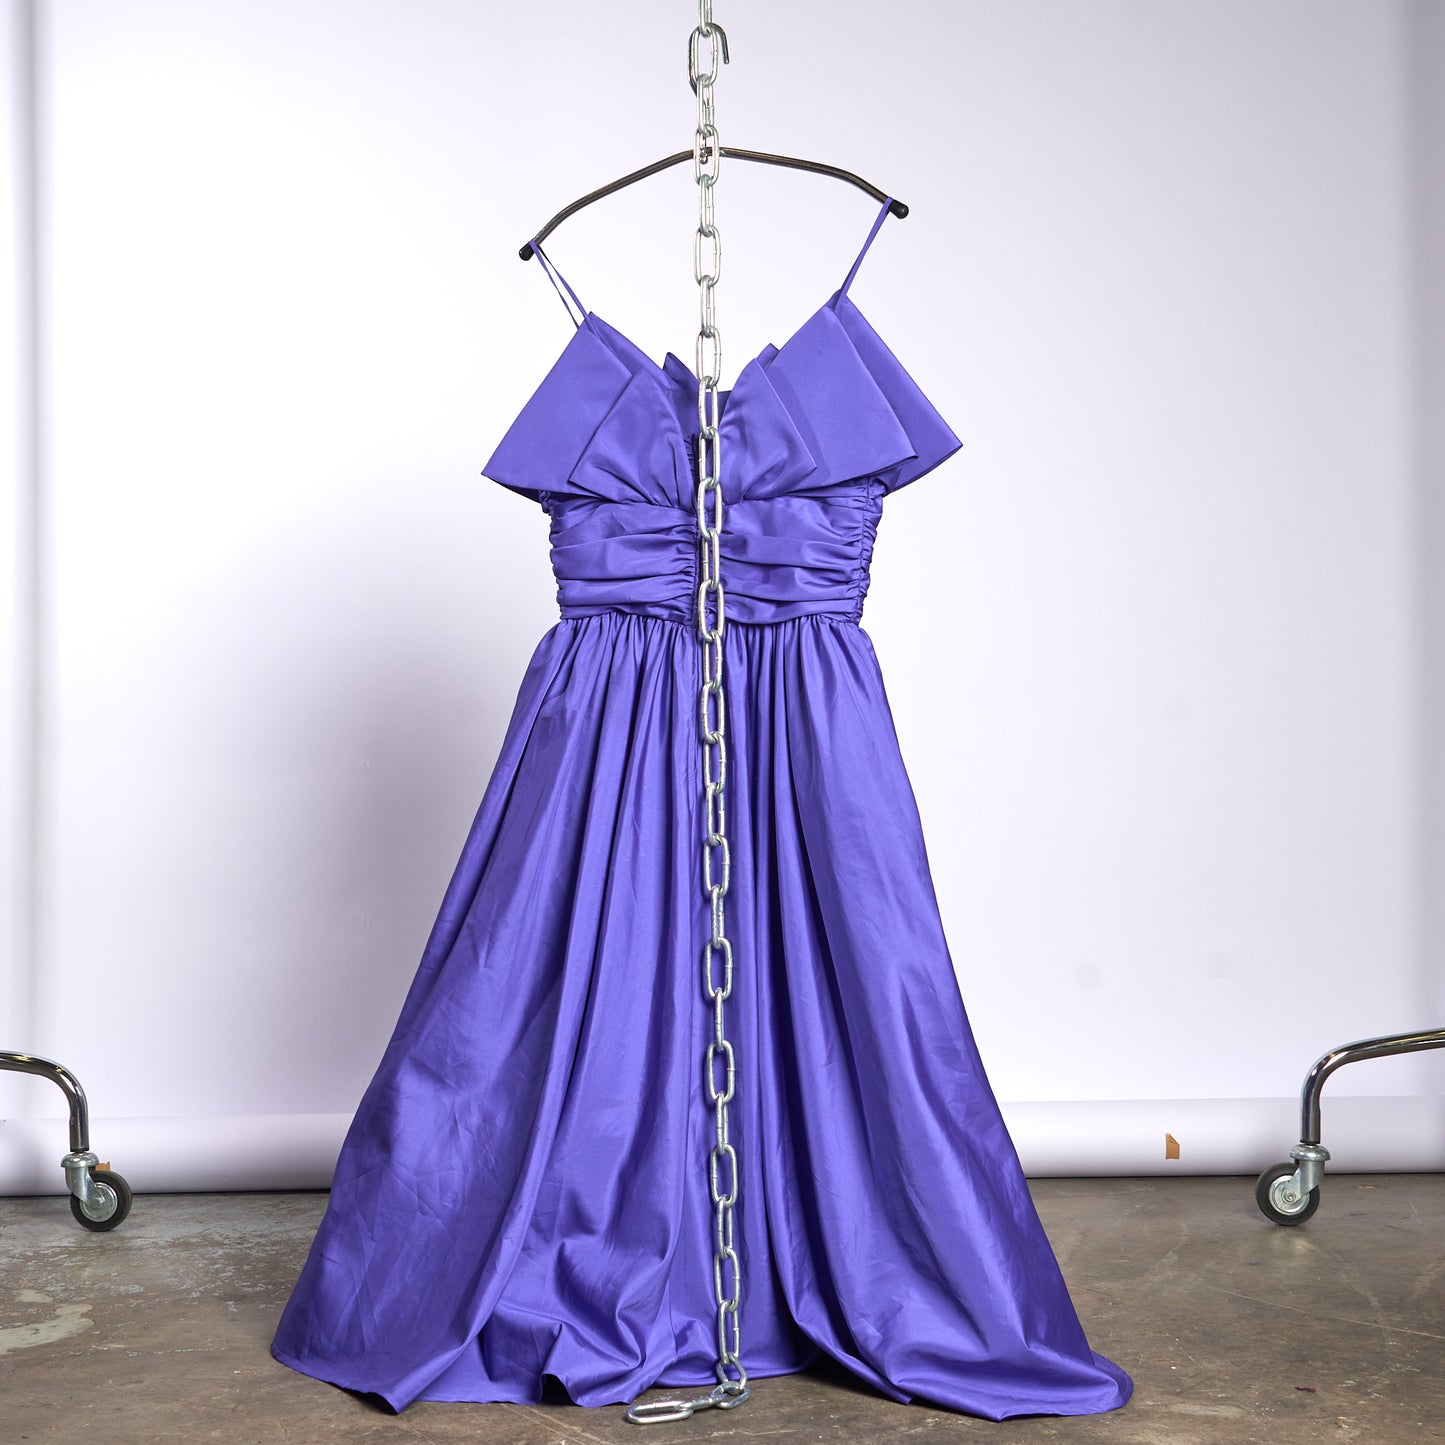 Purple Chic Dress with Big Bows on Front and Backside